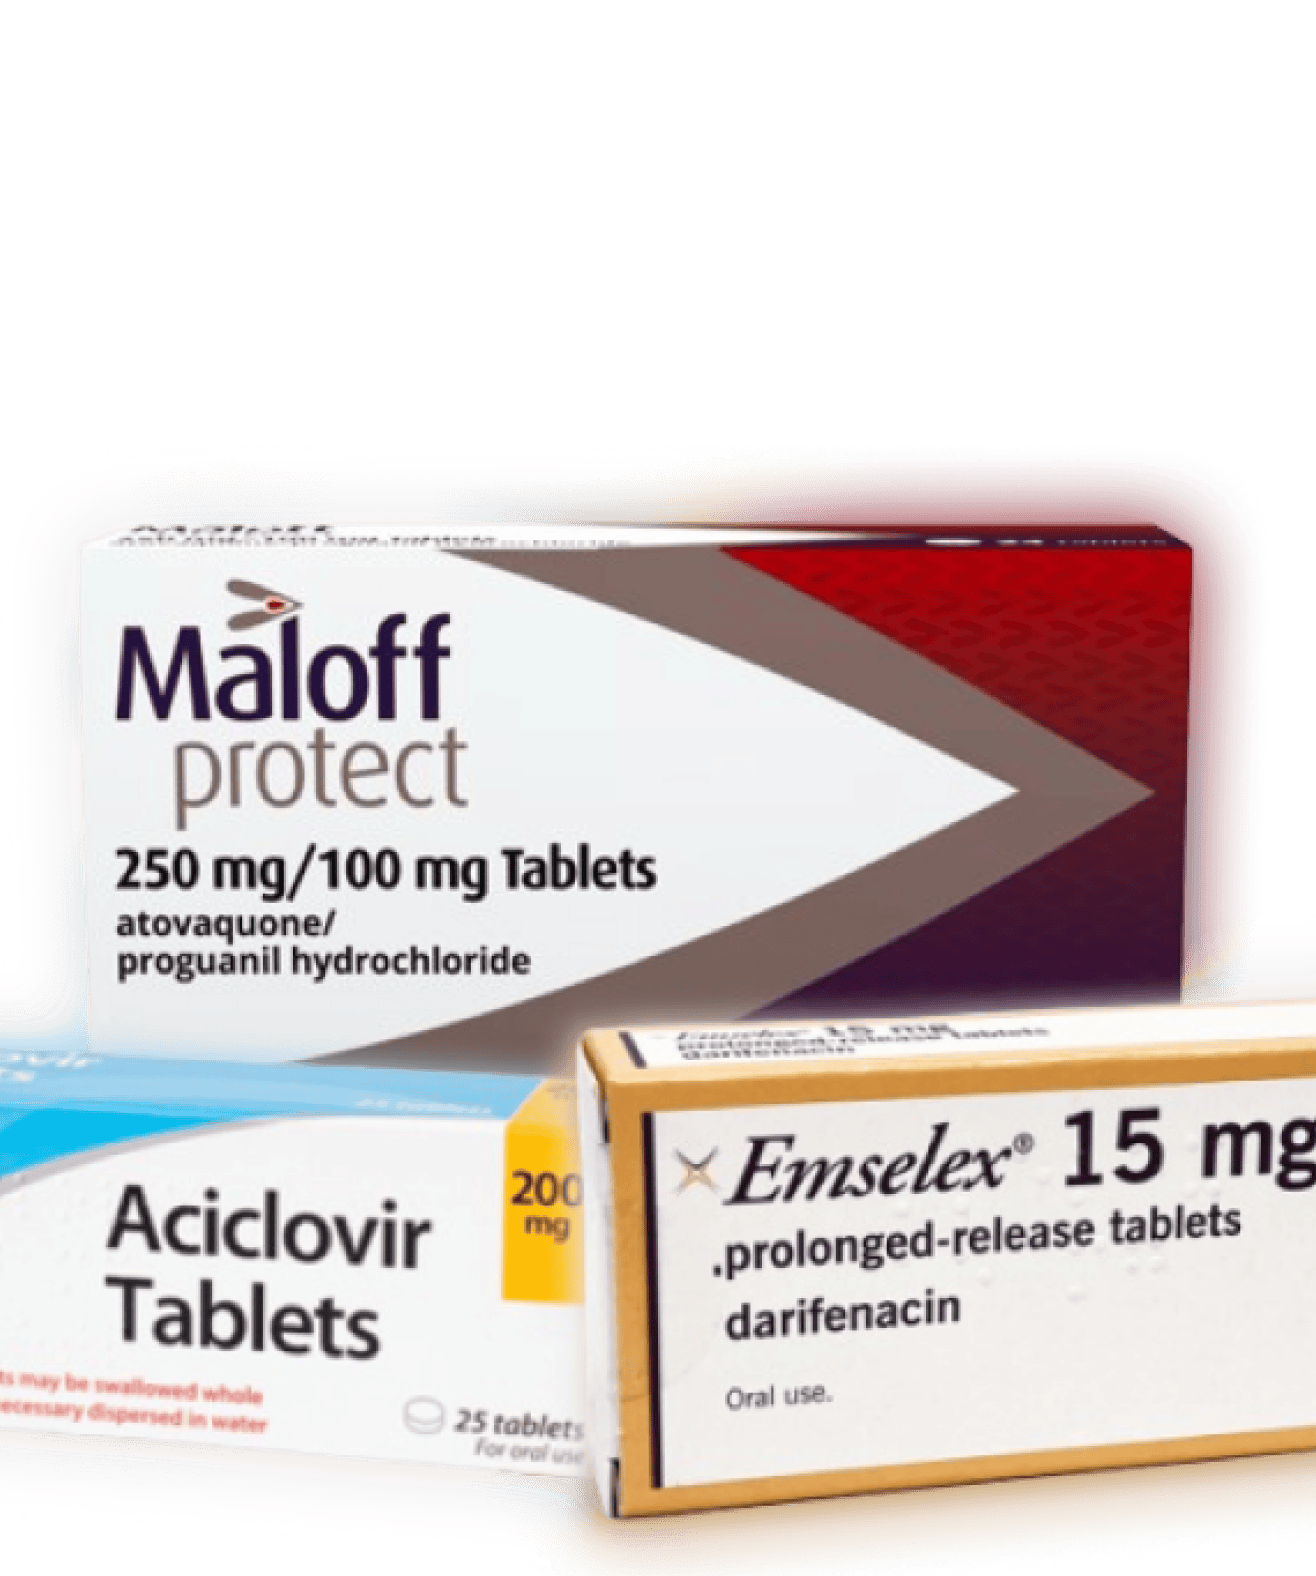 A variety of medication boxes, including Maloff protect (250 mg/100 mg) tablets, Aciclovir tablets, and Emselex (15 mg) prolonged-release tablets.